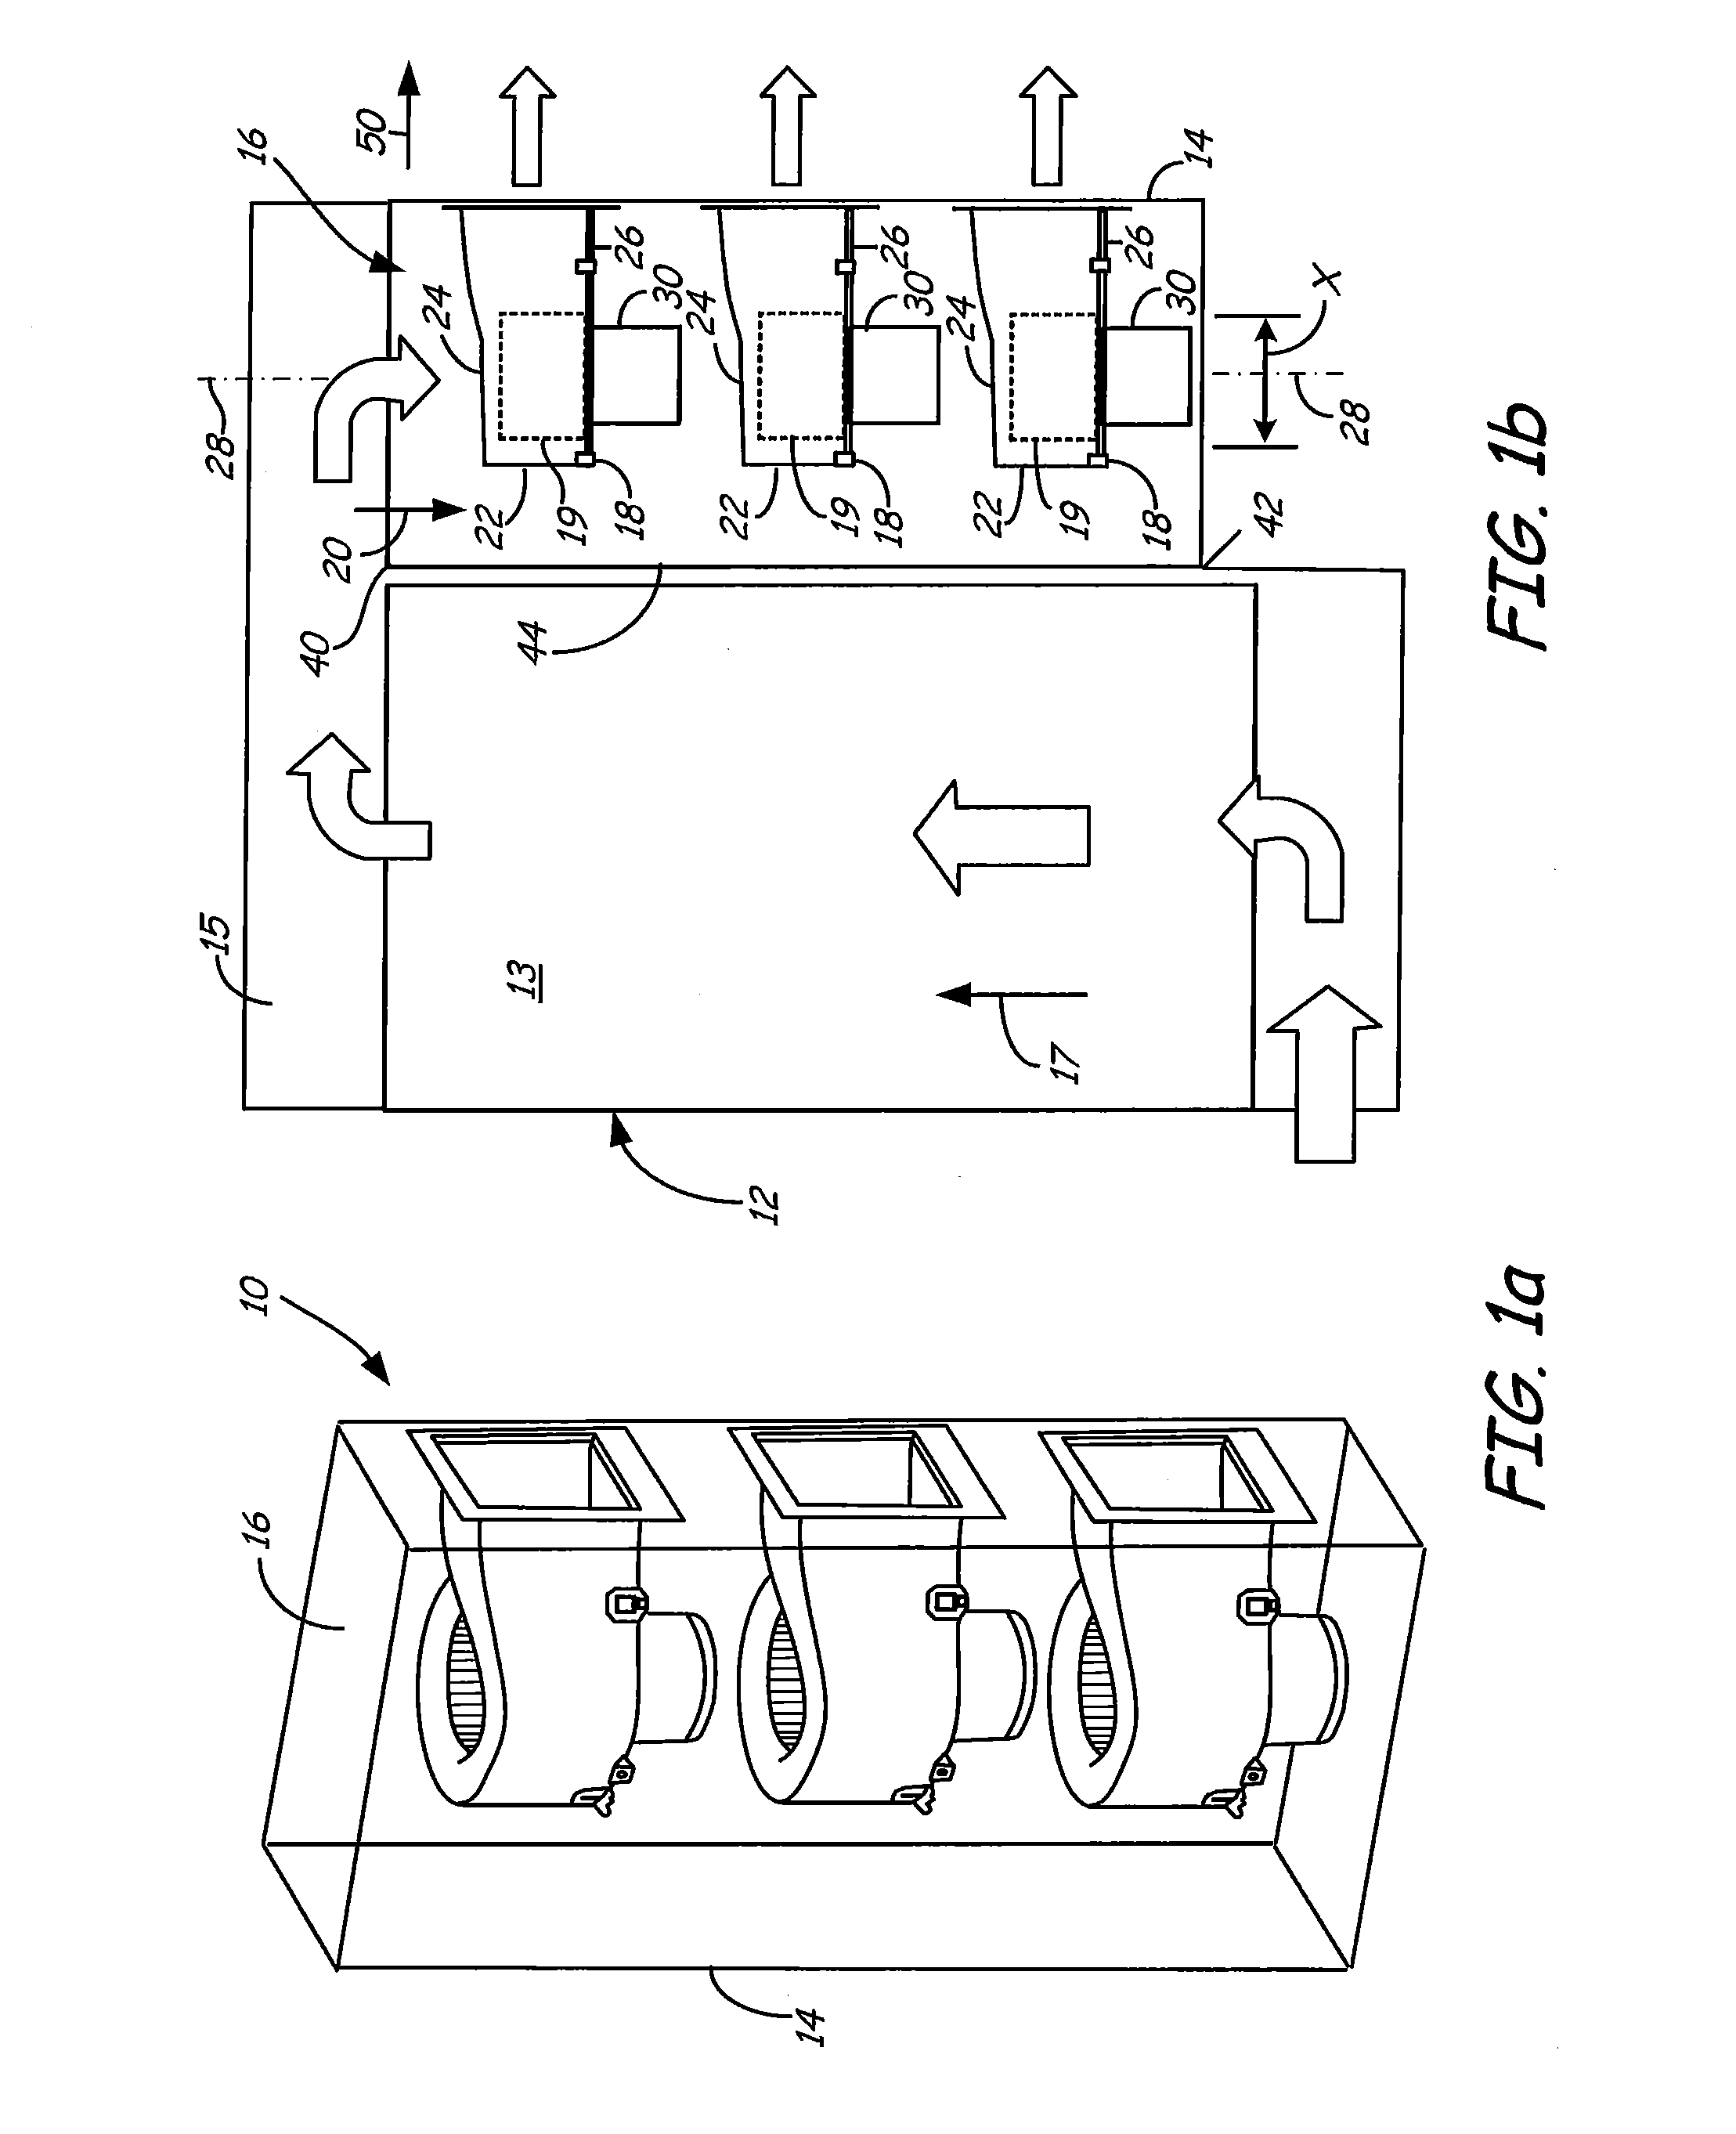 Cooling module with multiple parallel blowers